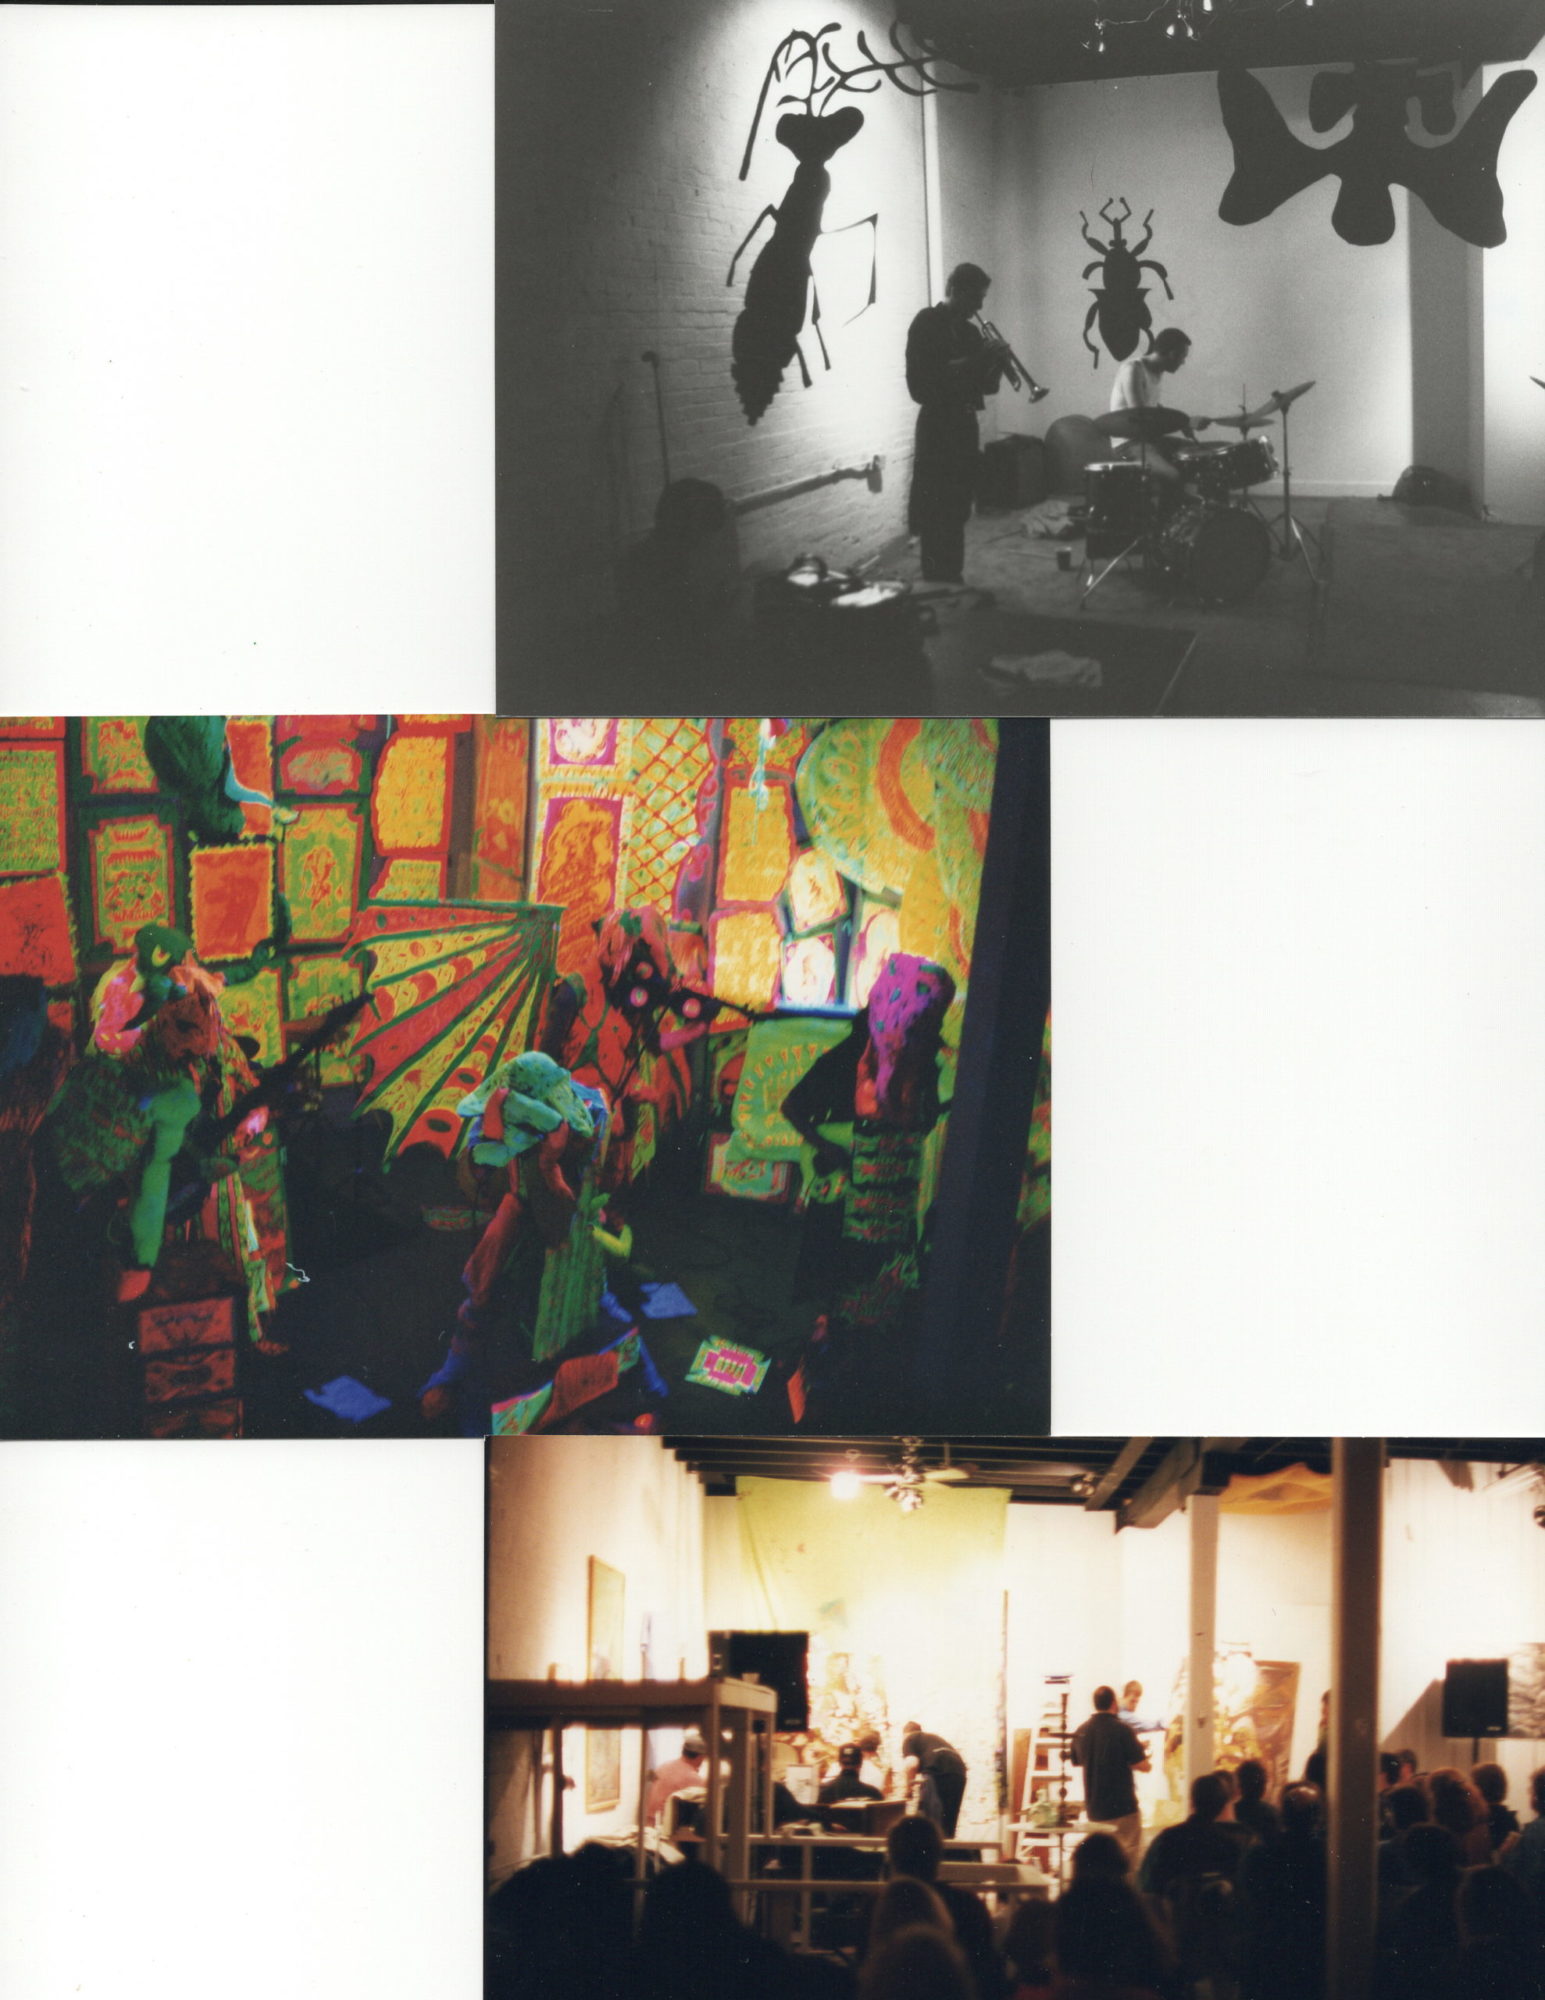 A collection of three photographs. The top photo is black and white and depicts hanging insects and musicians performing in the space. The middle photograph is intensely colorful and the bottom depicts people standing and sitting in a gallery.